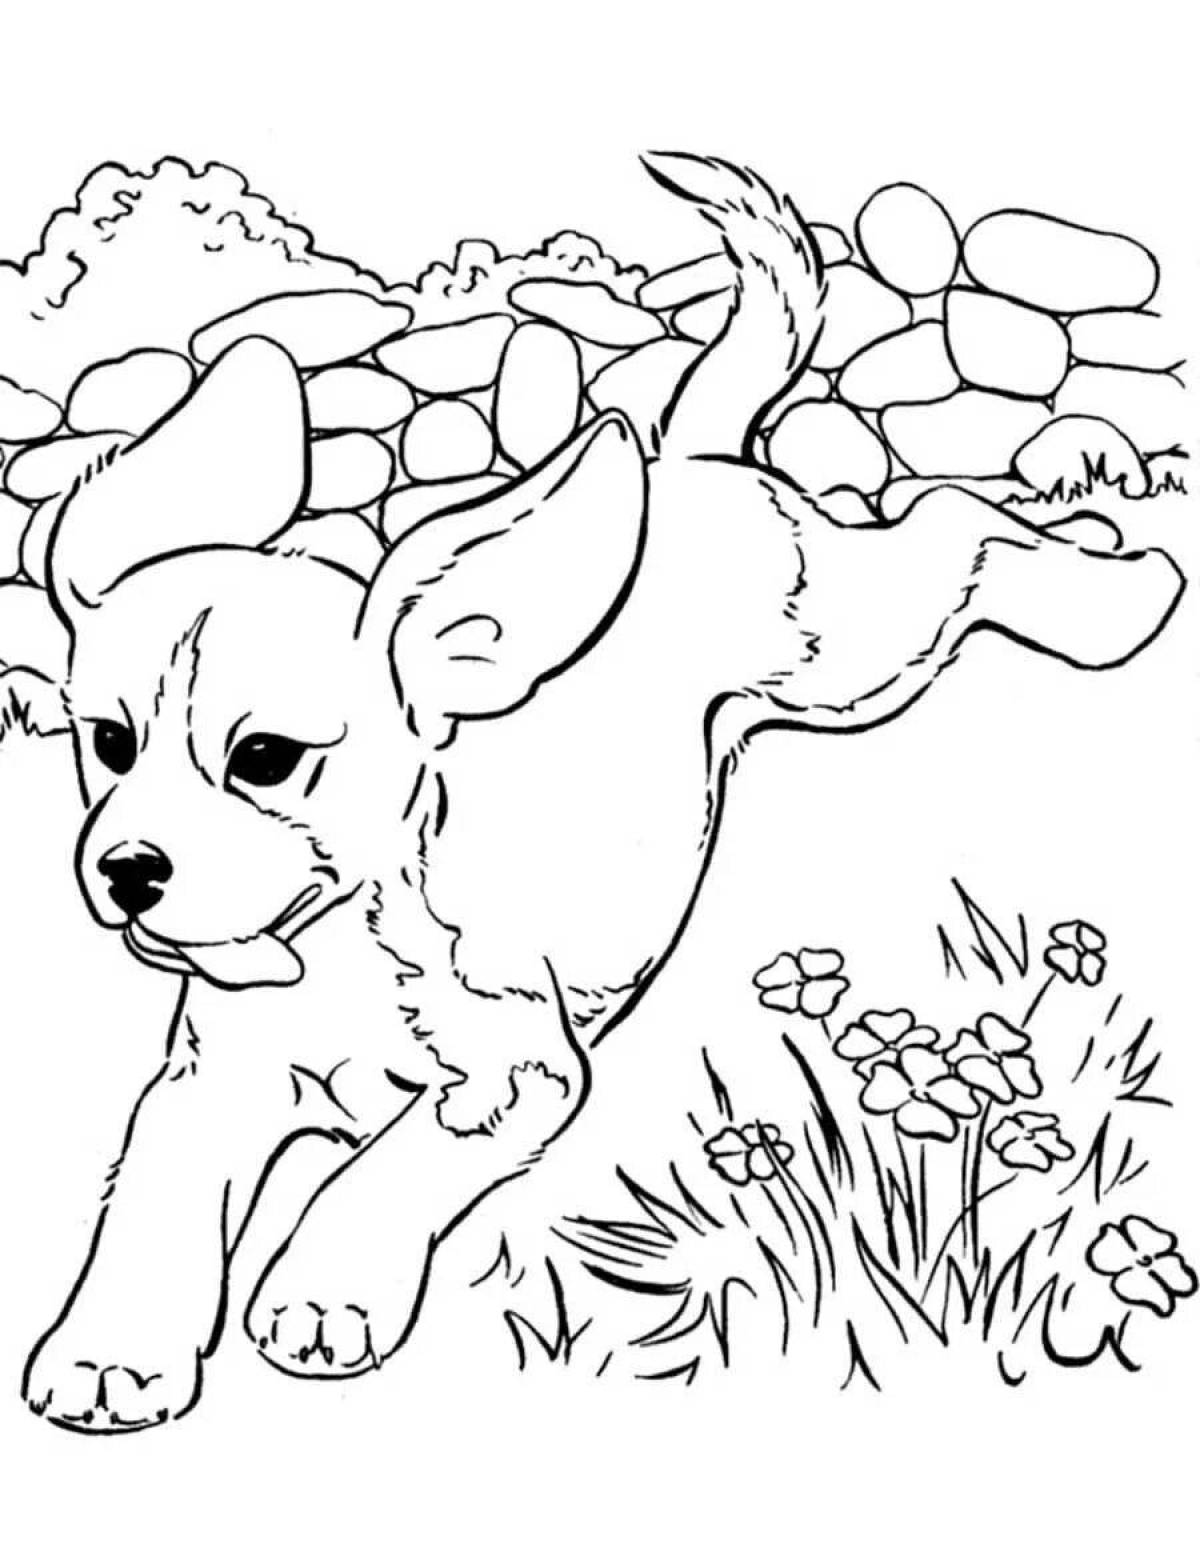 Adorable animal coloring book for 12 year olds